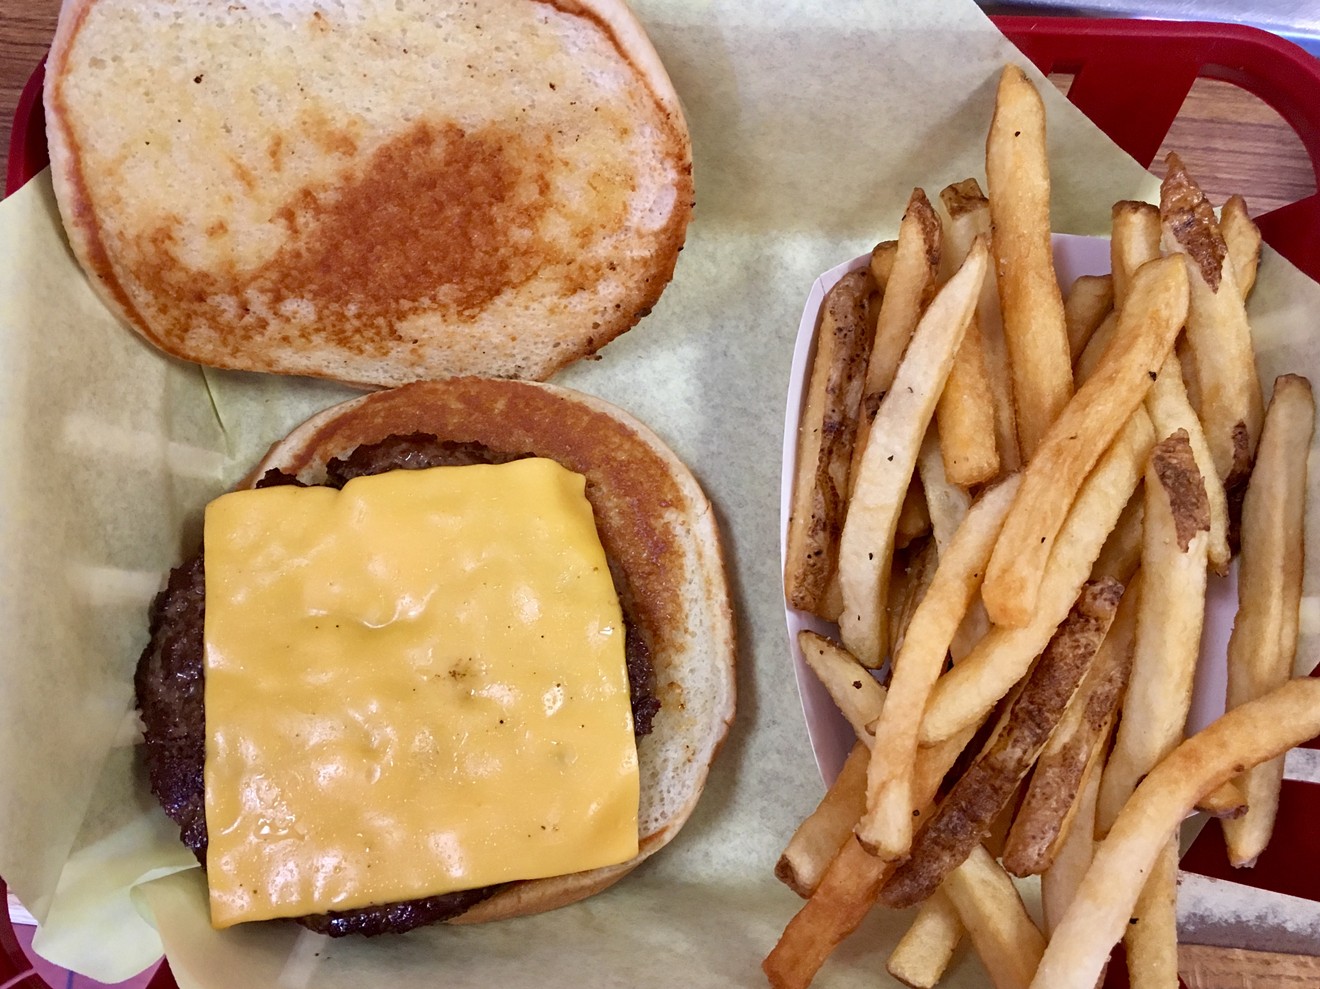 A cheeseburger with fries is $6.55. Toppings are at the toppings bar.